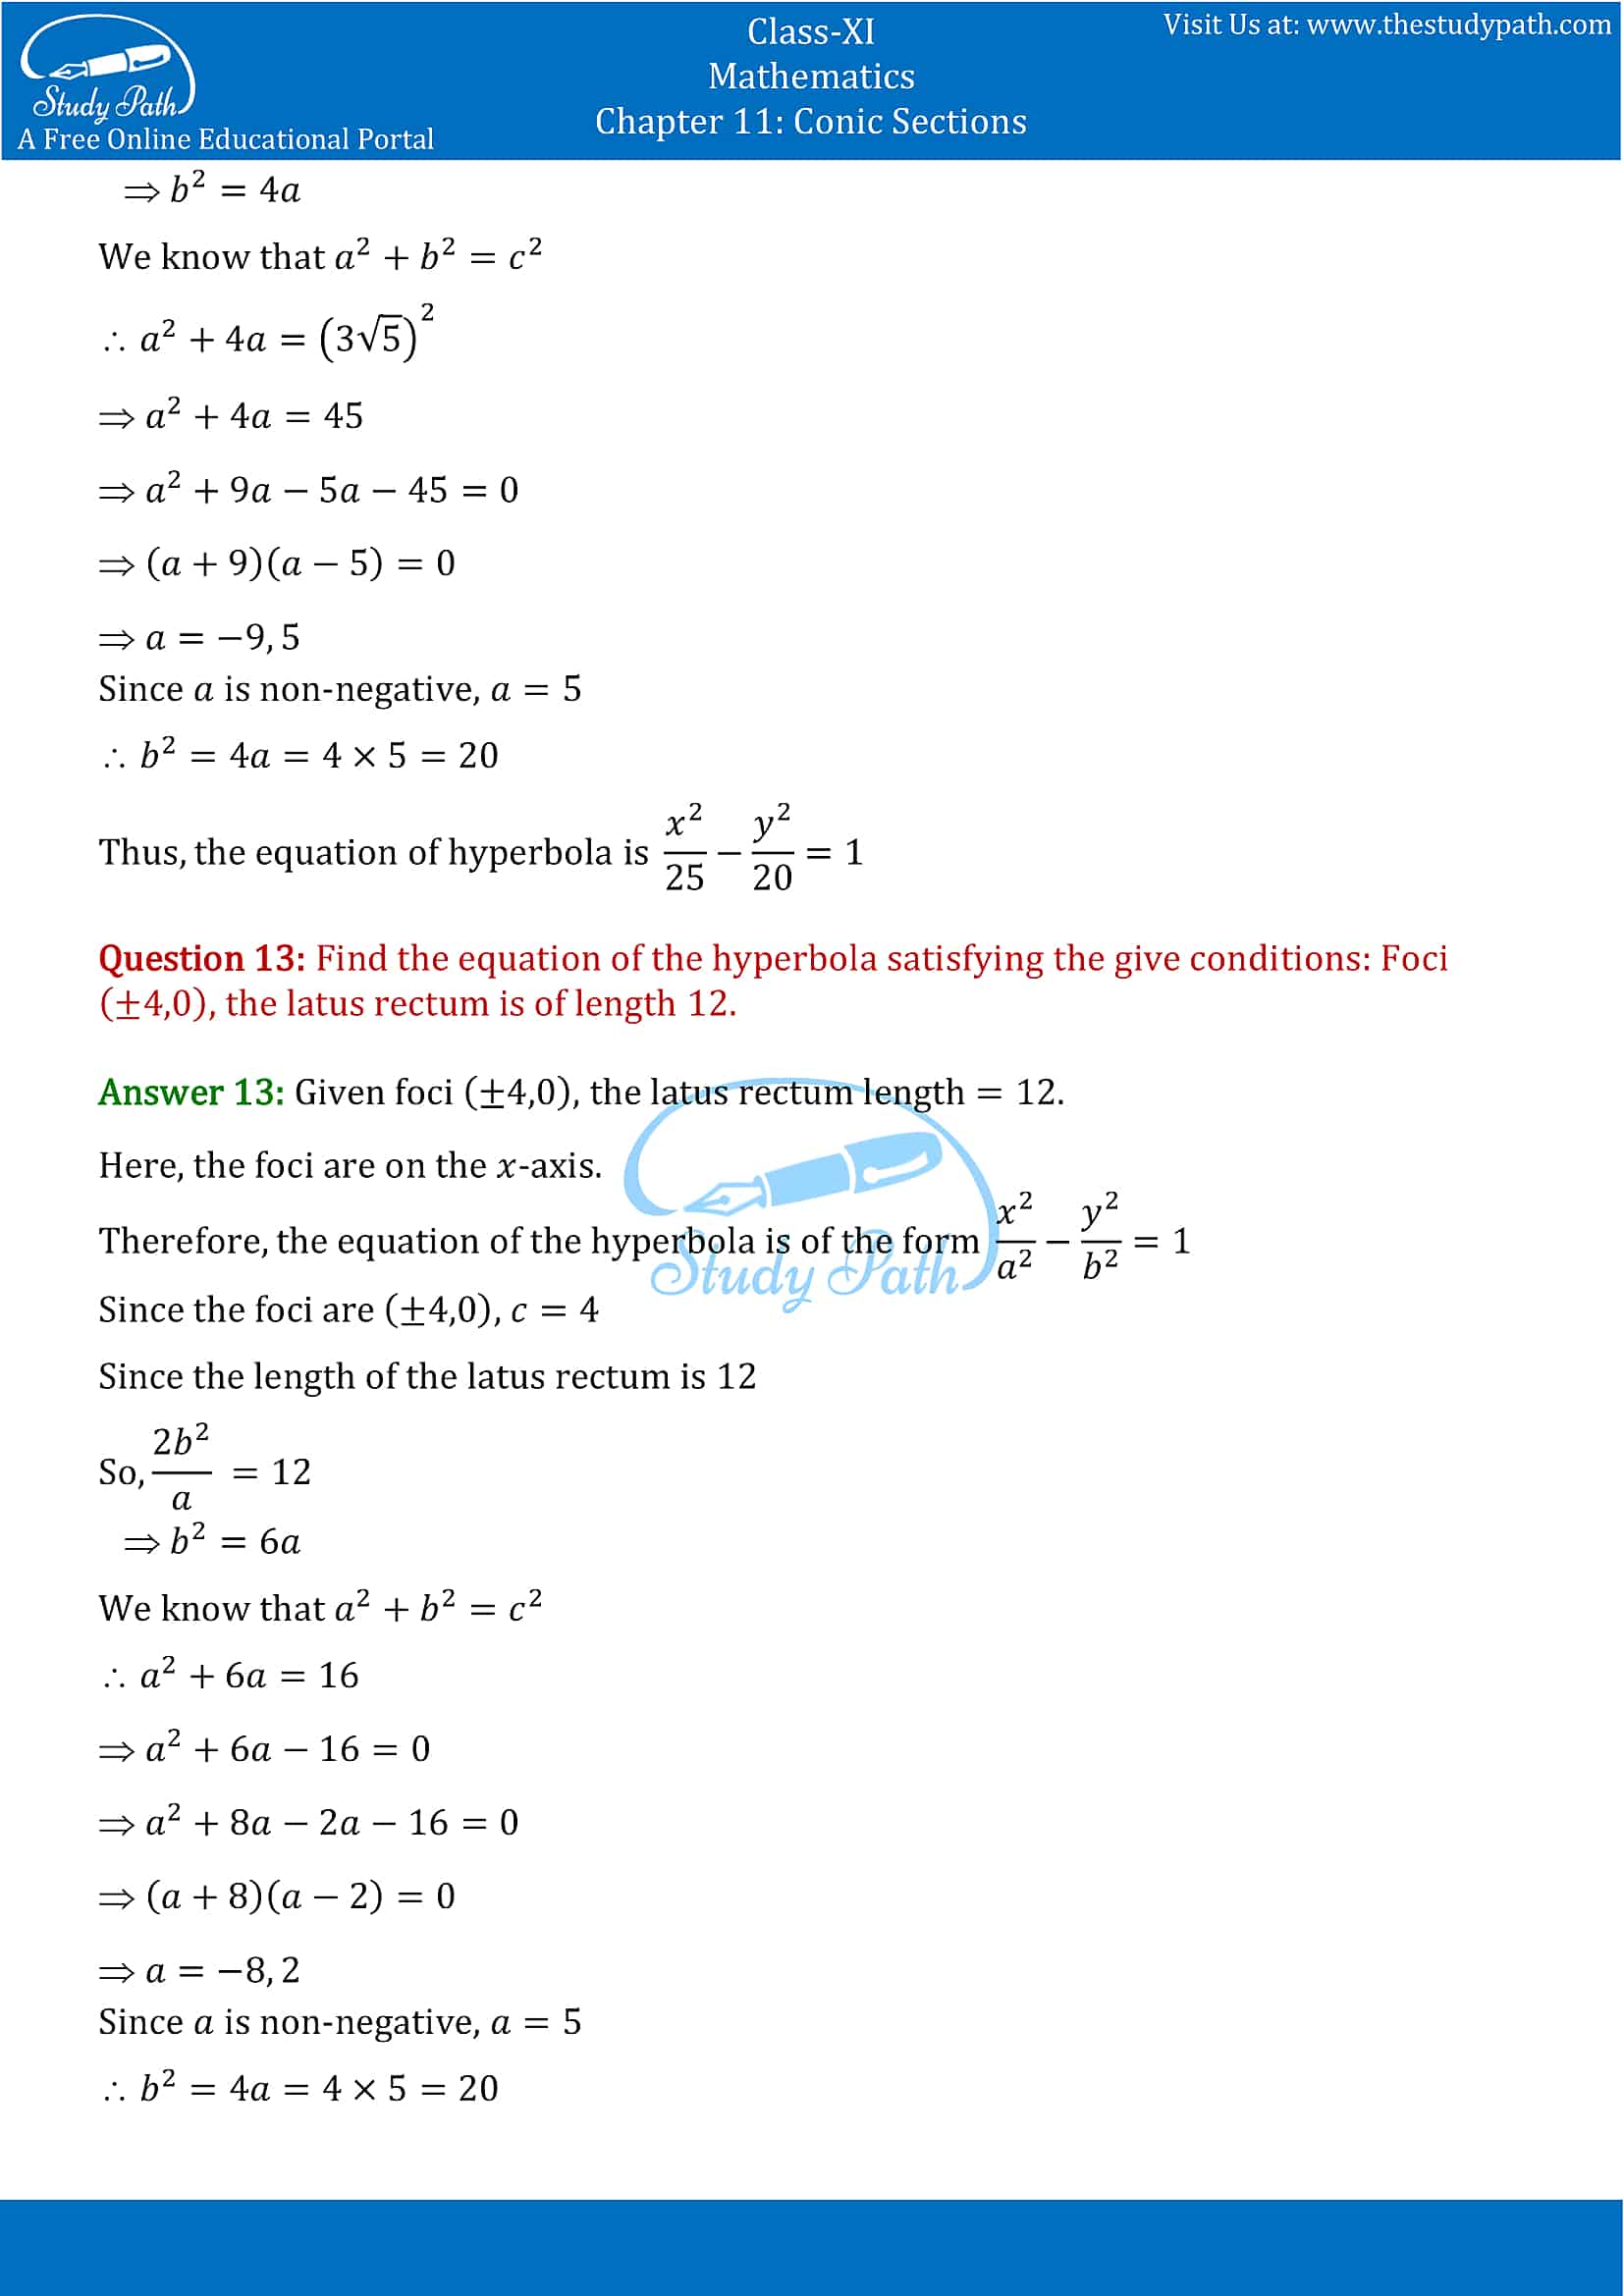 NCERT Solutions for Class 11 Maths chapter 11 Conic Section Exercise 11.4 Part-8